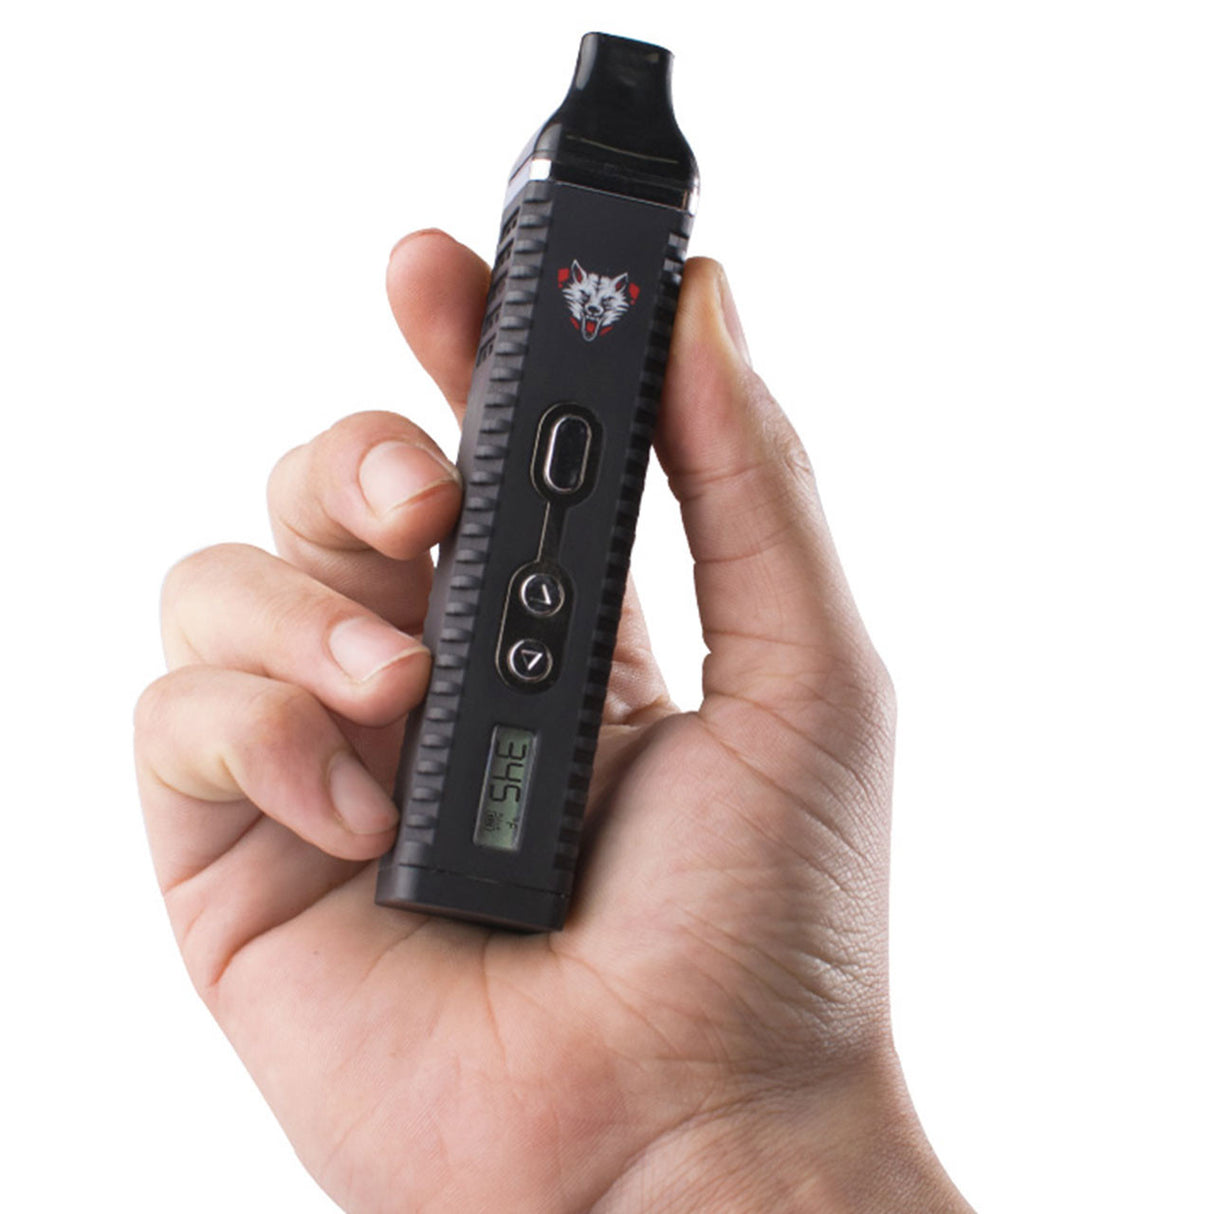 Wulf Vape Dry Herb Digital Vaporizer with LED Indicator Screen and Push Button Start. Portable, lightweight, and discrete